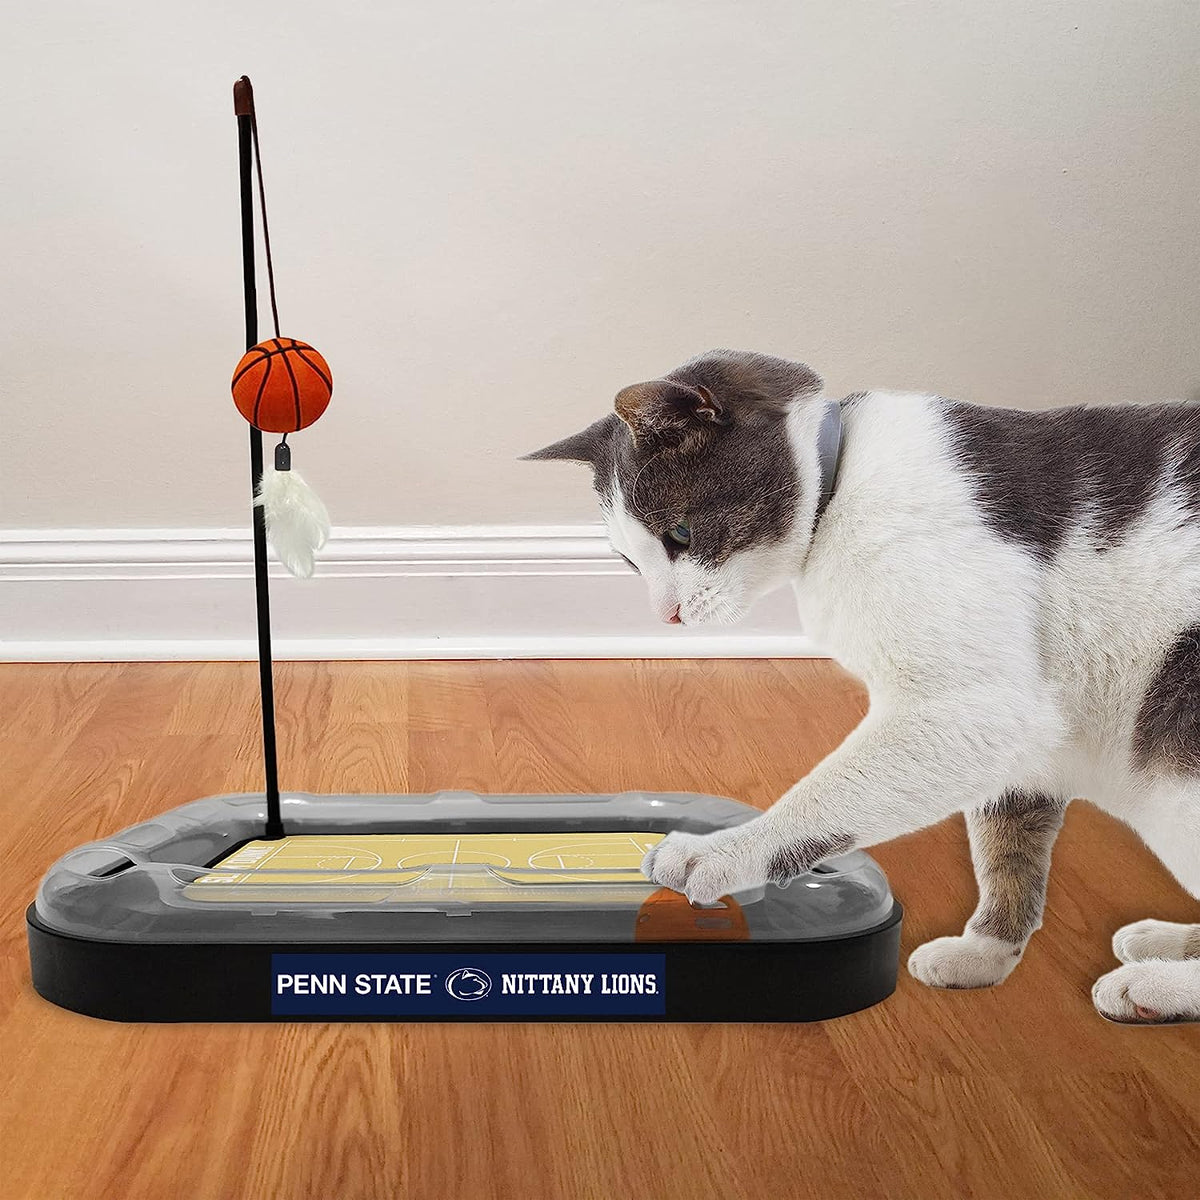 Penn State Nittany Lions Basketball Cat Scratcher Toy